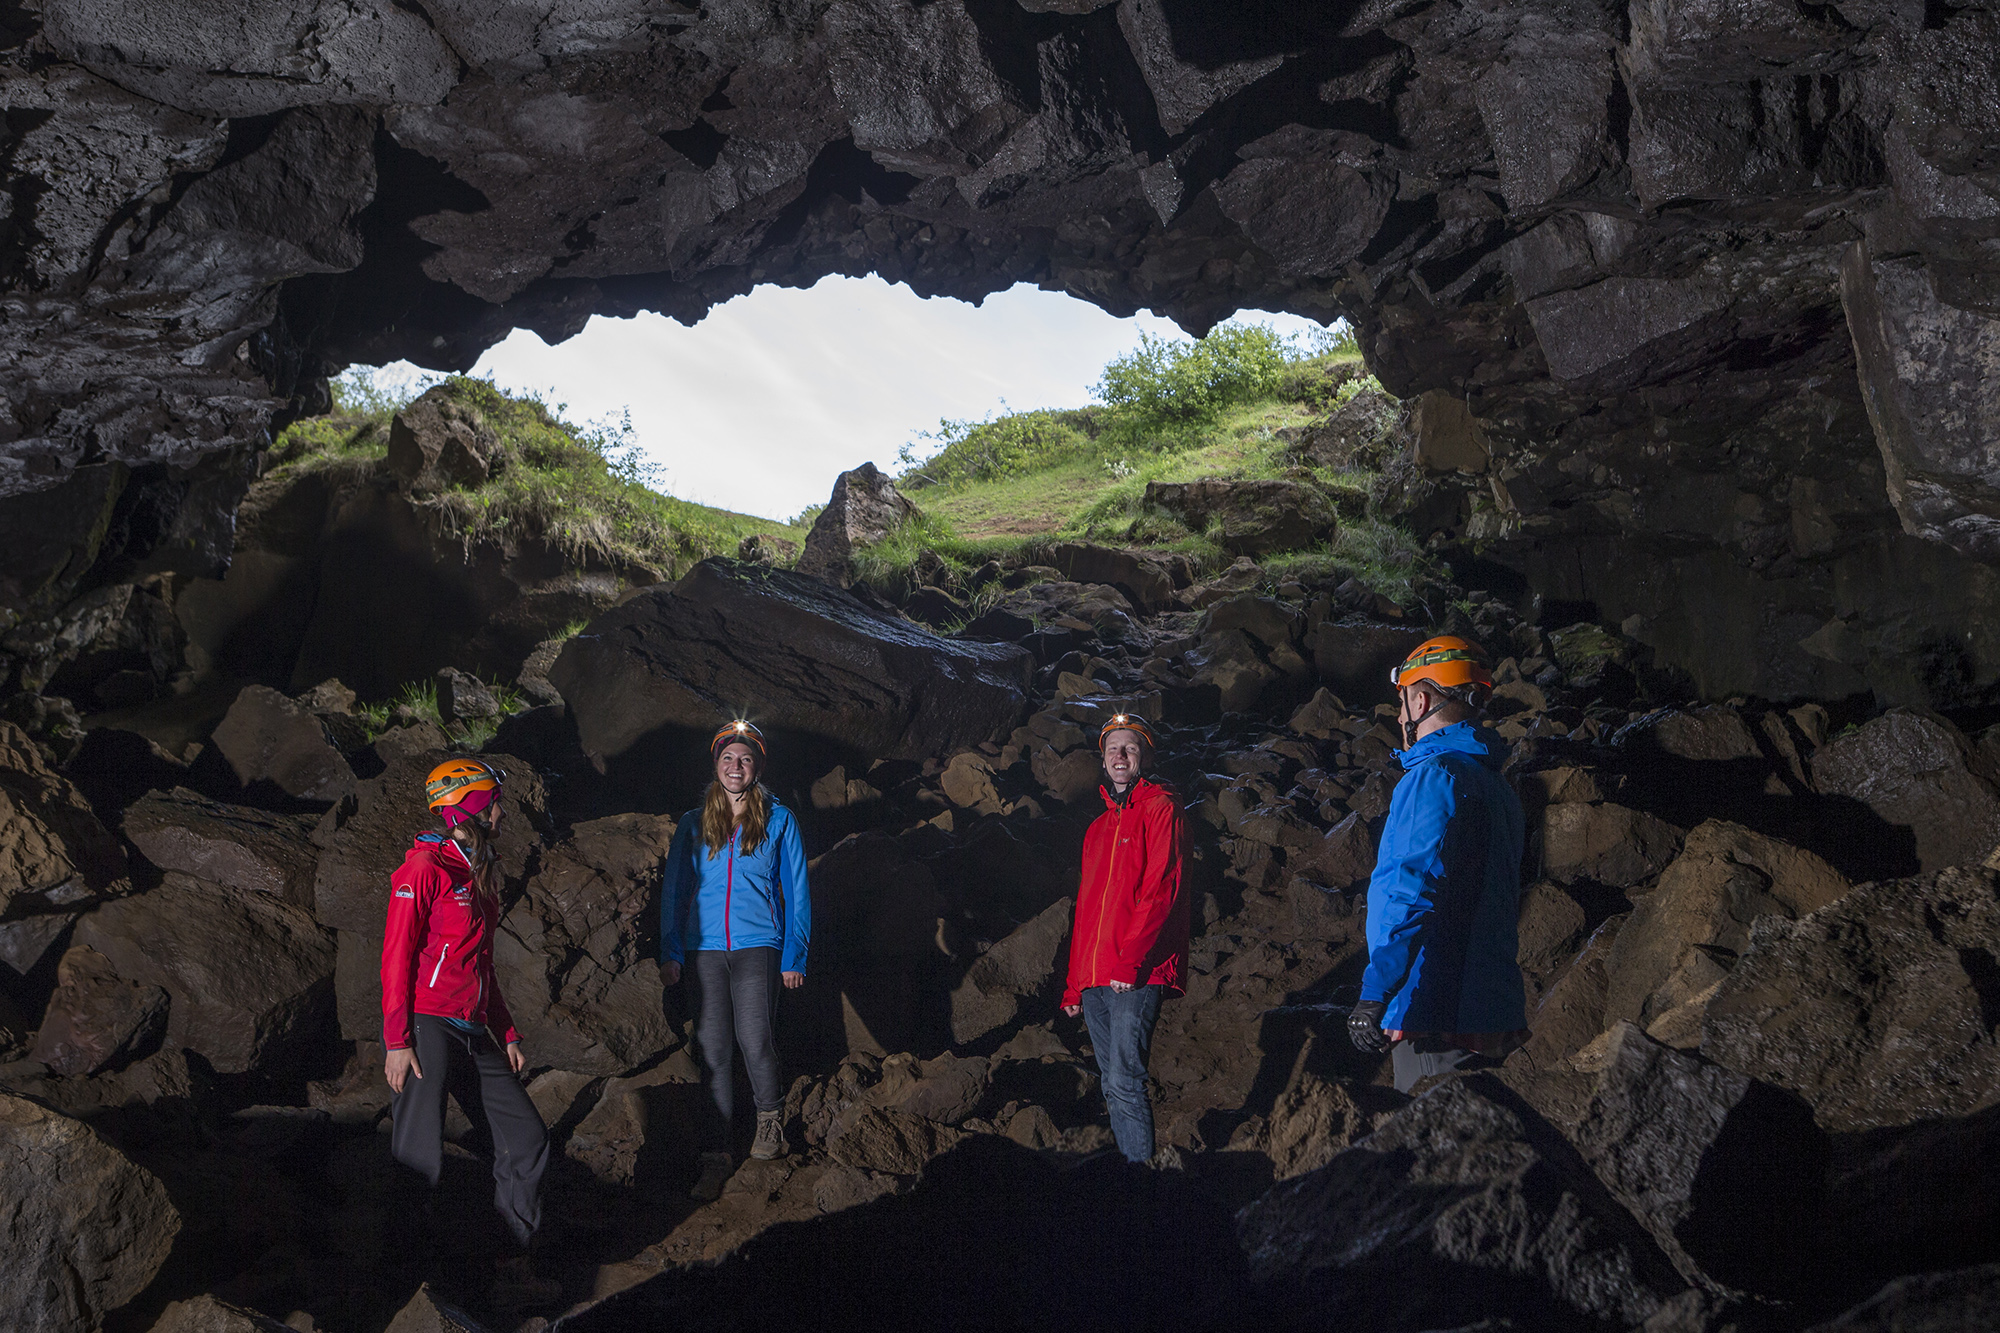 Have you experienced the majesty of Iceland's subterranean cave networks?